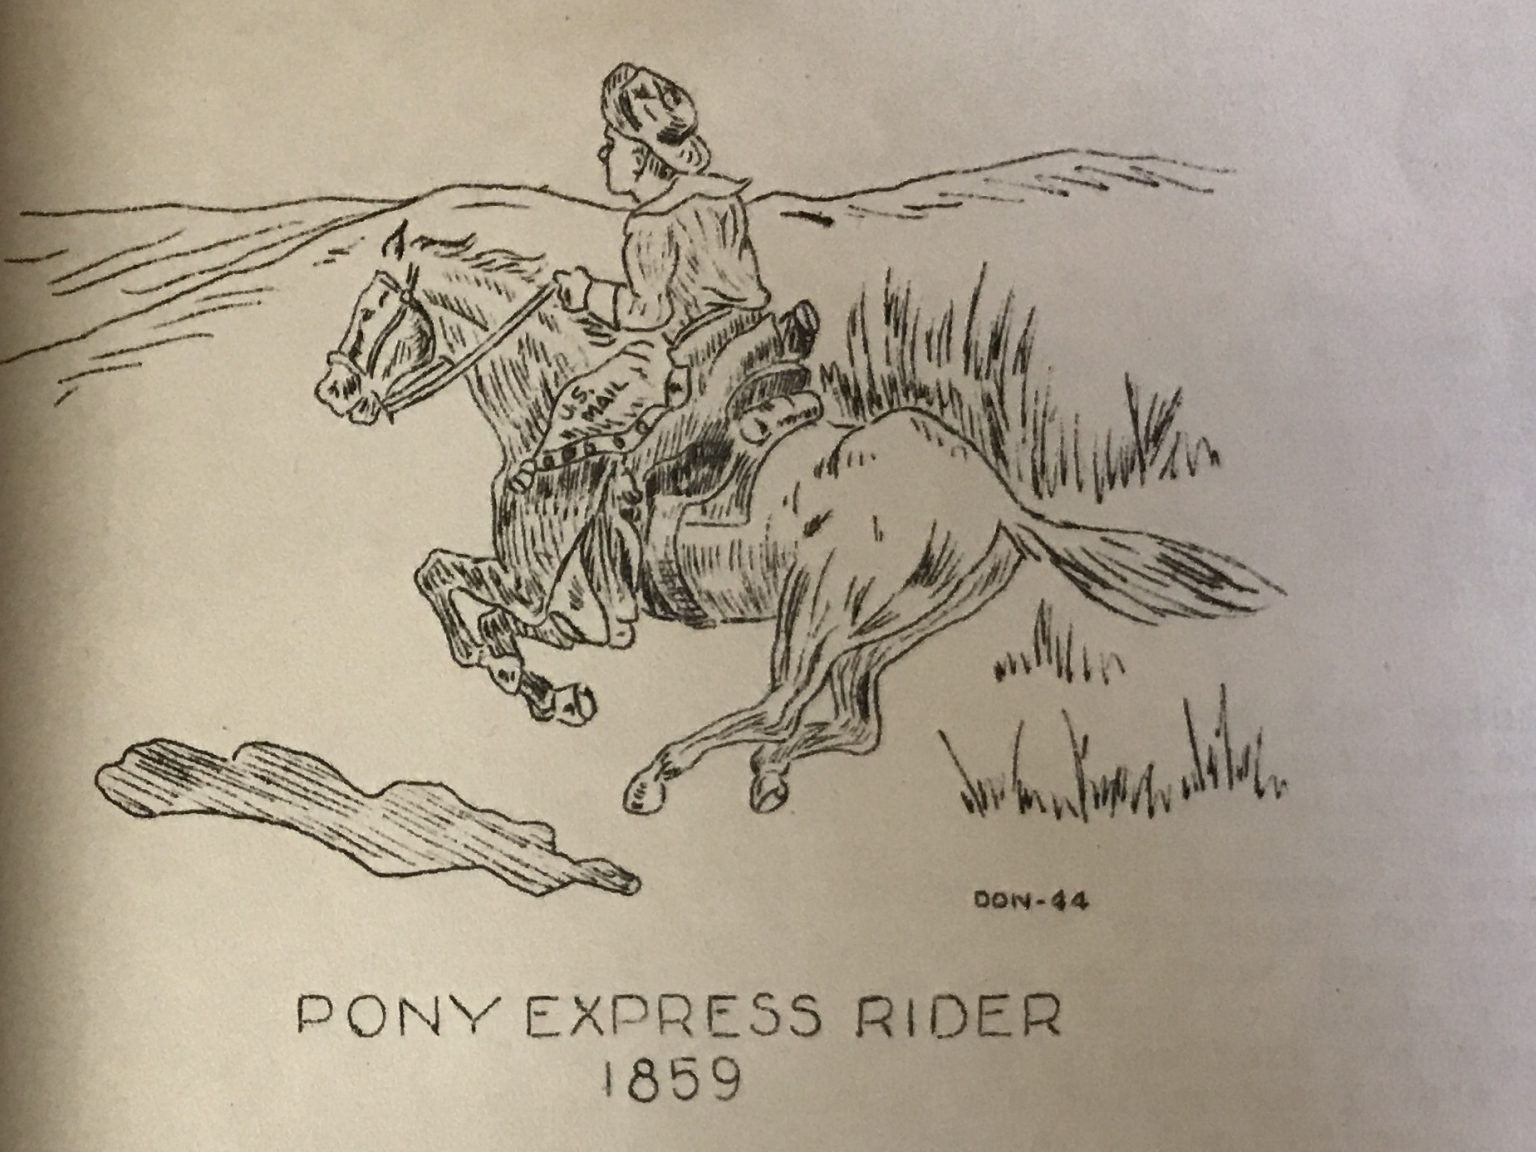 Cartoon of a pony express rider in one of Michael Halsted's works